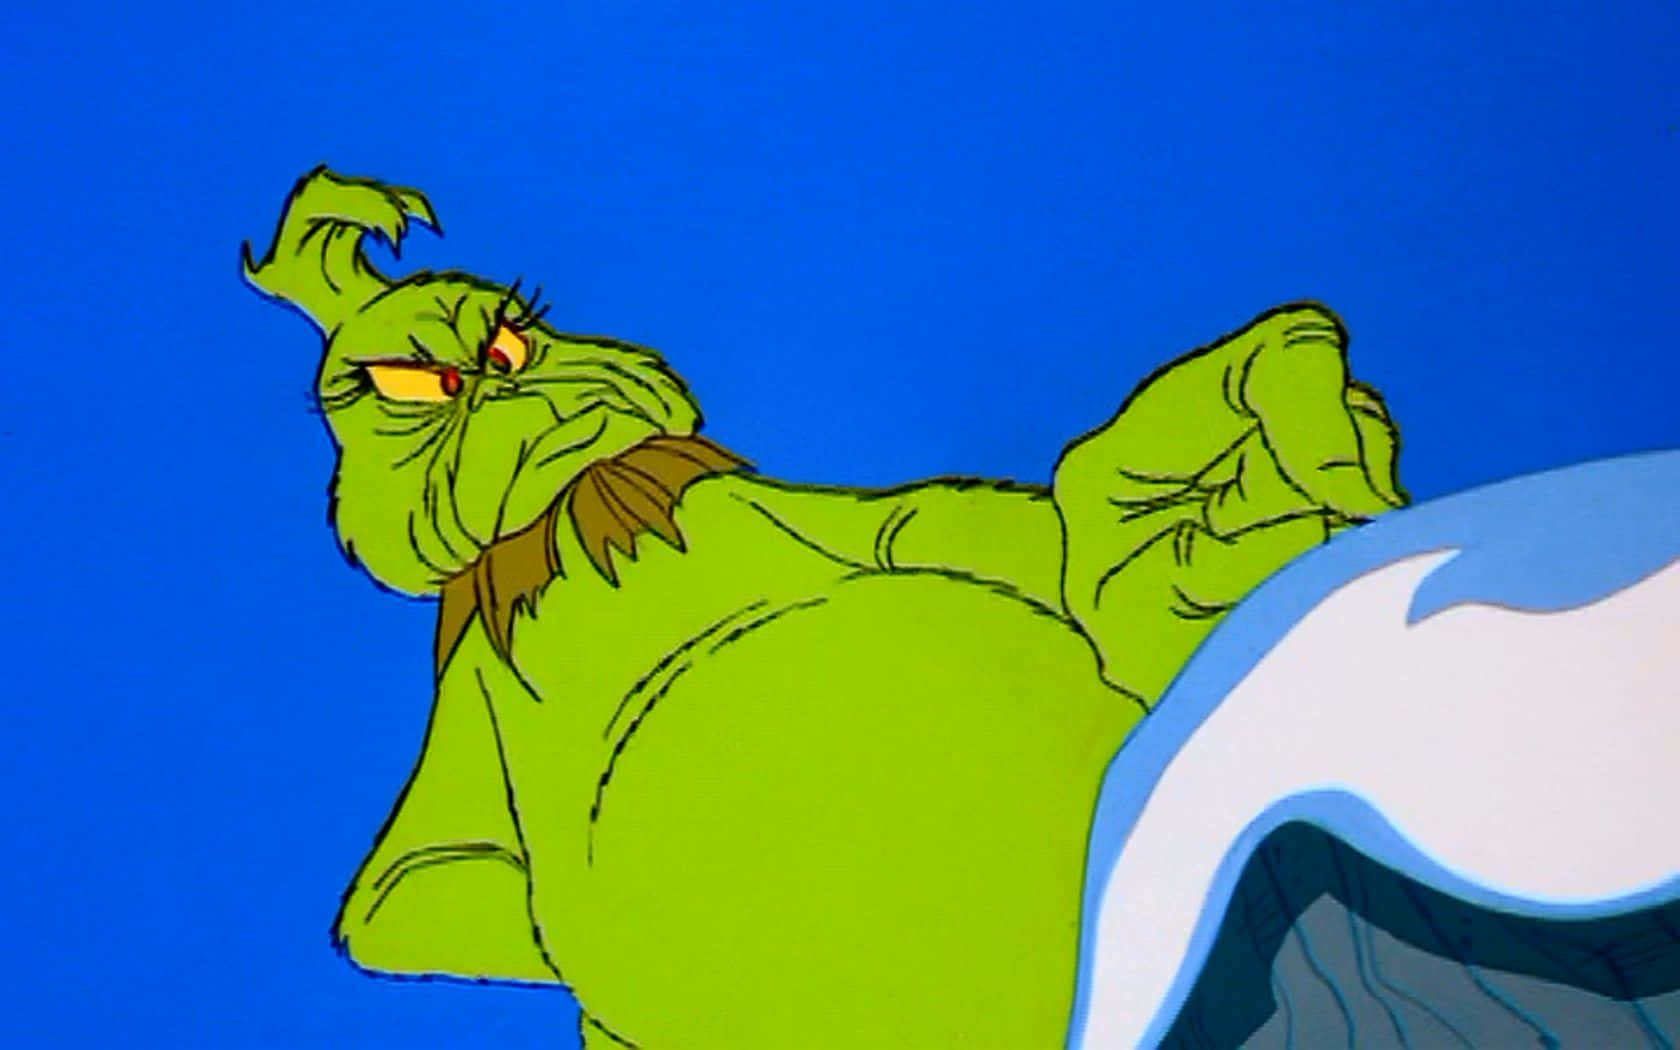 Spread The Christmas Joy Even If It's From The Heart Of The Grinch Background